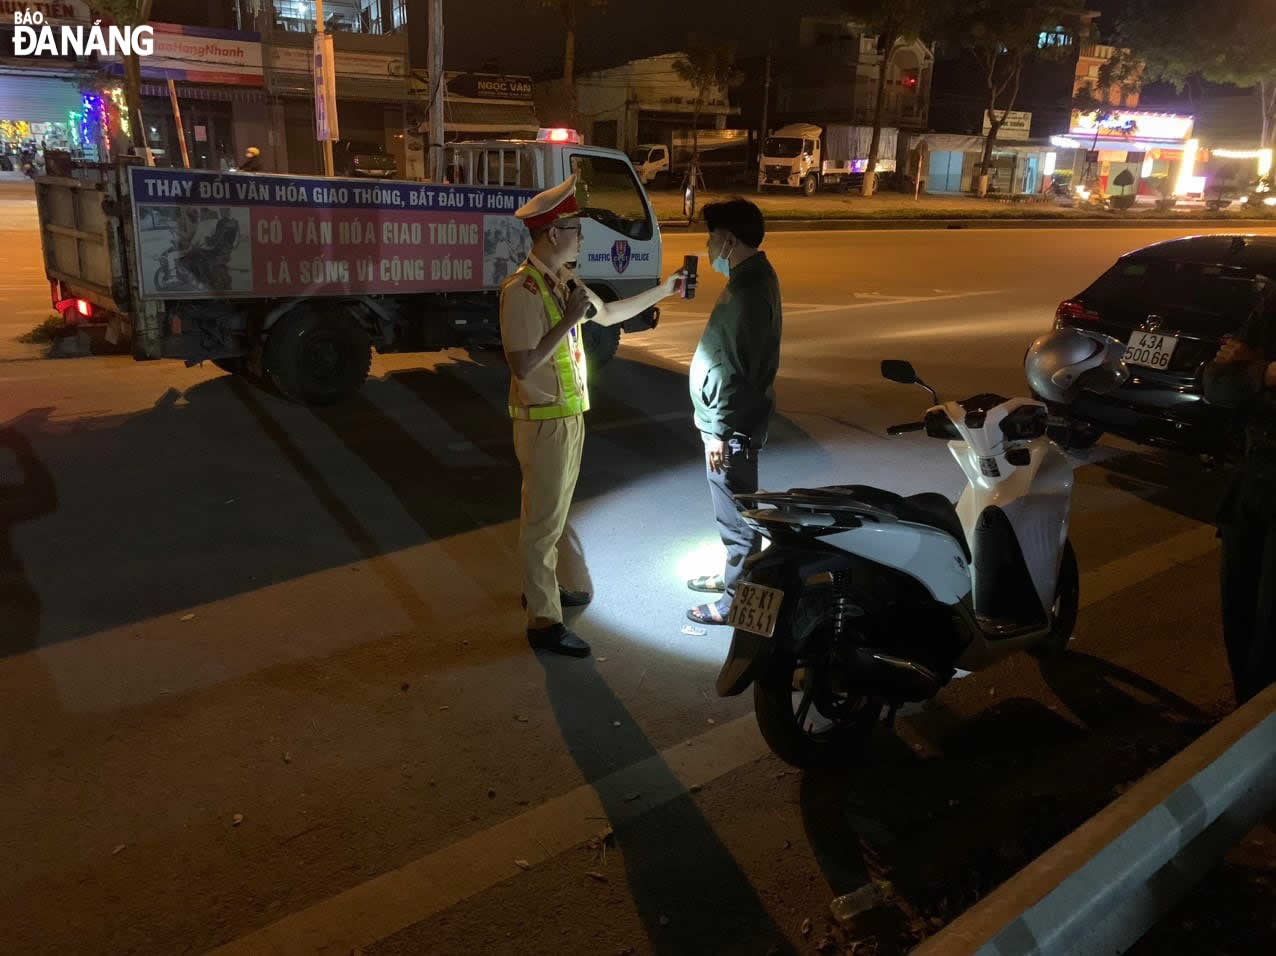 A traffic police officer measures the breath alcohol concentration of a driver 